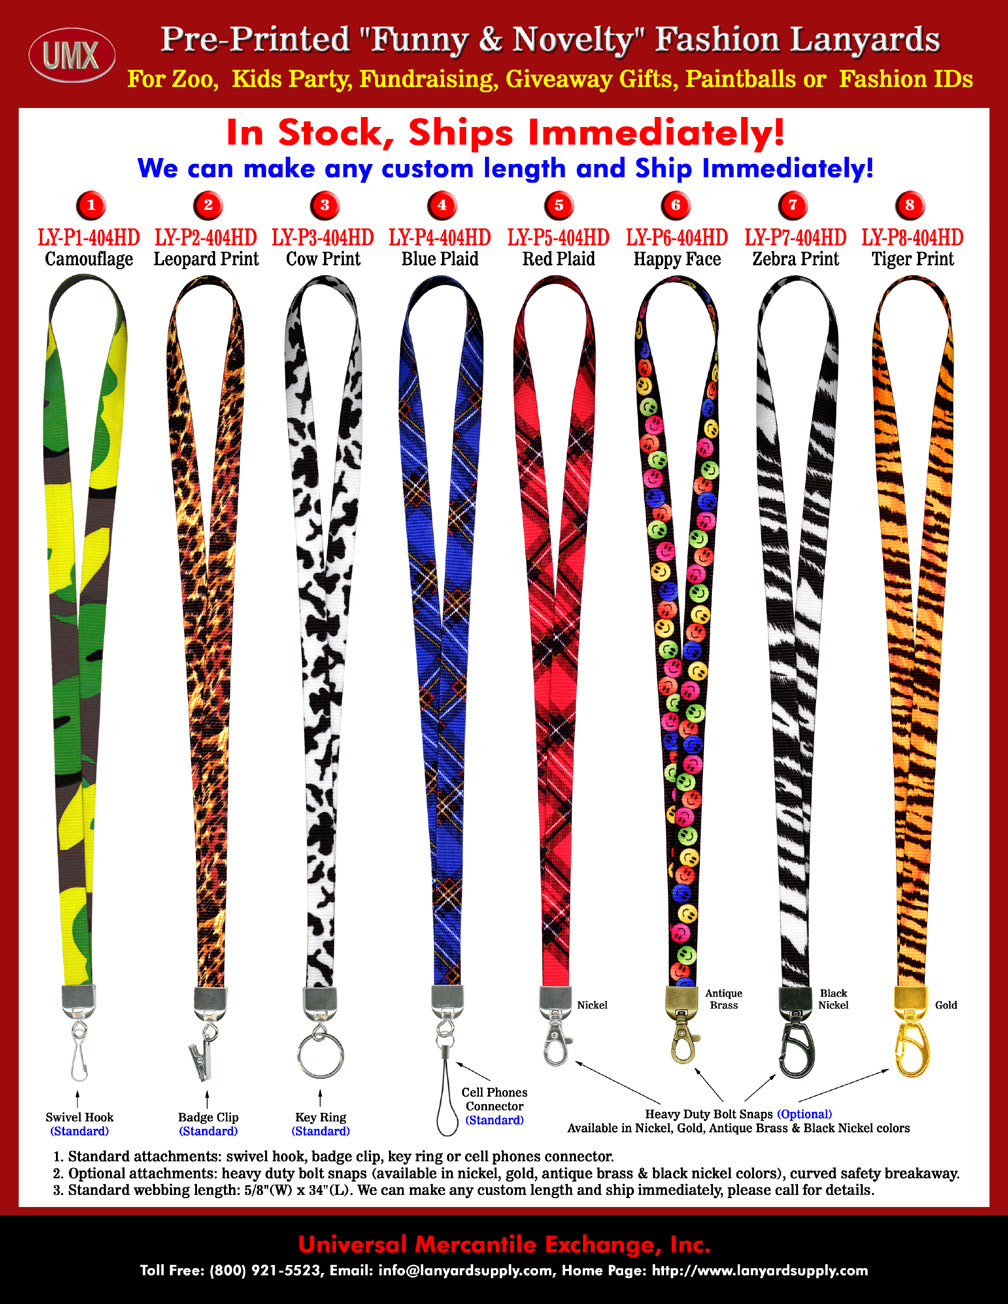 Paintball lanyards are pre-printed lanyards with attractive rosette coat patterns.